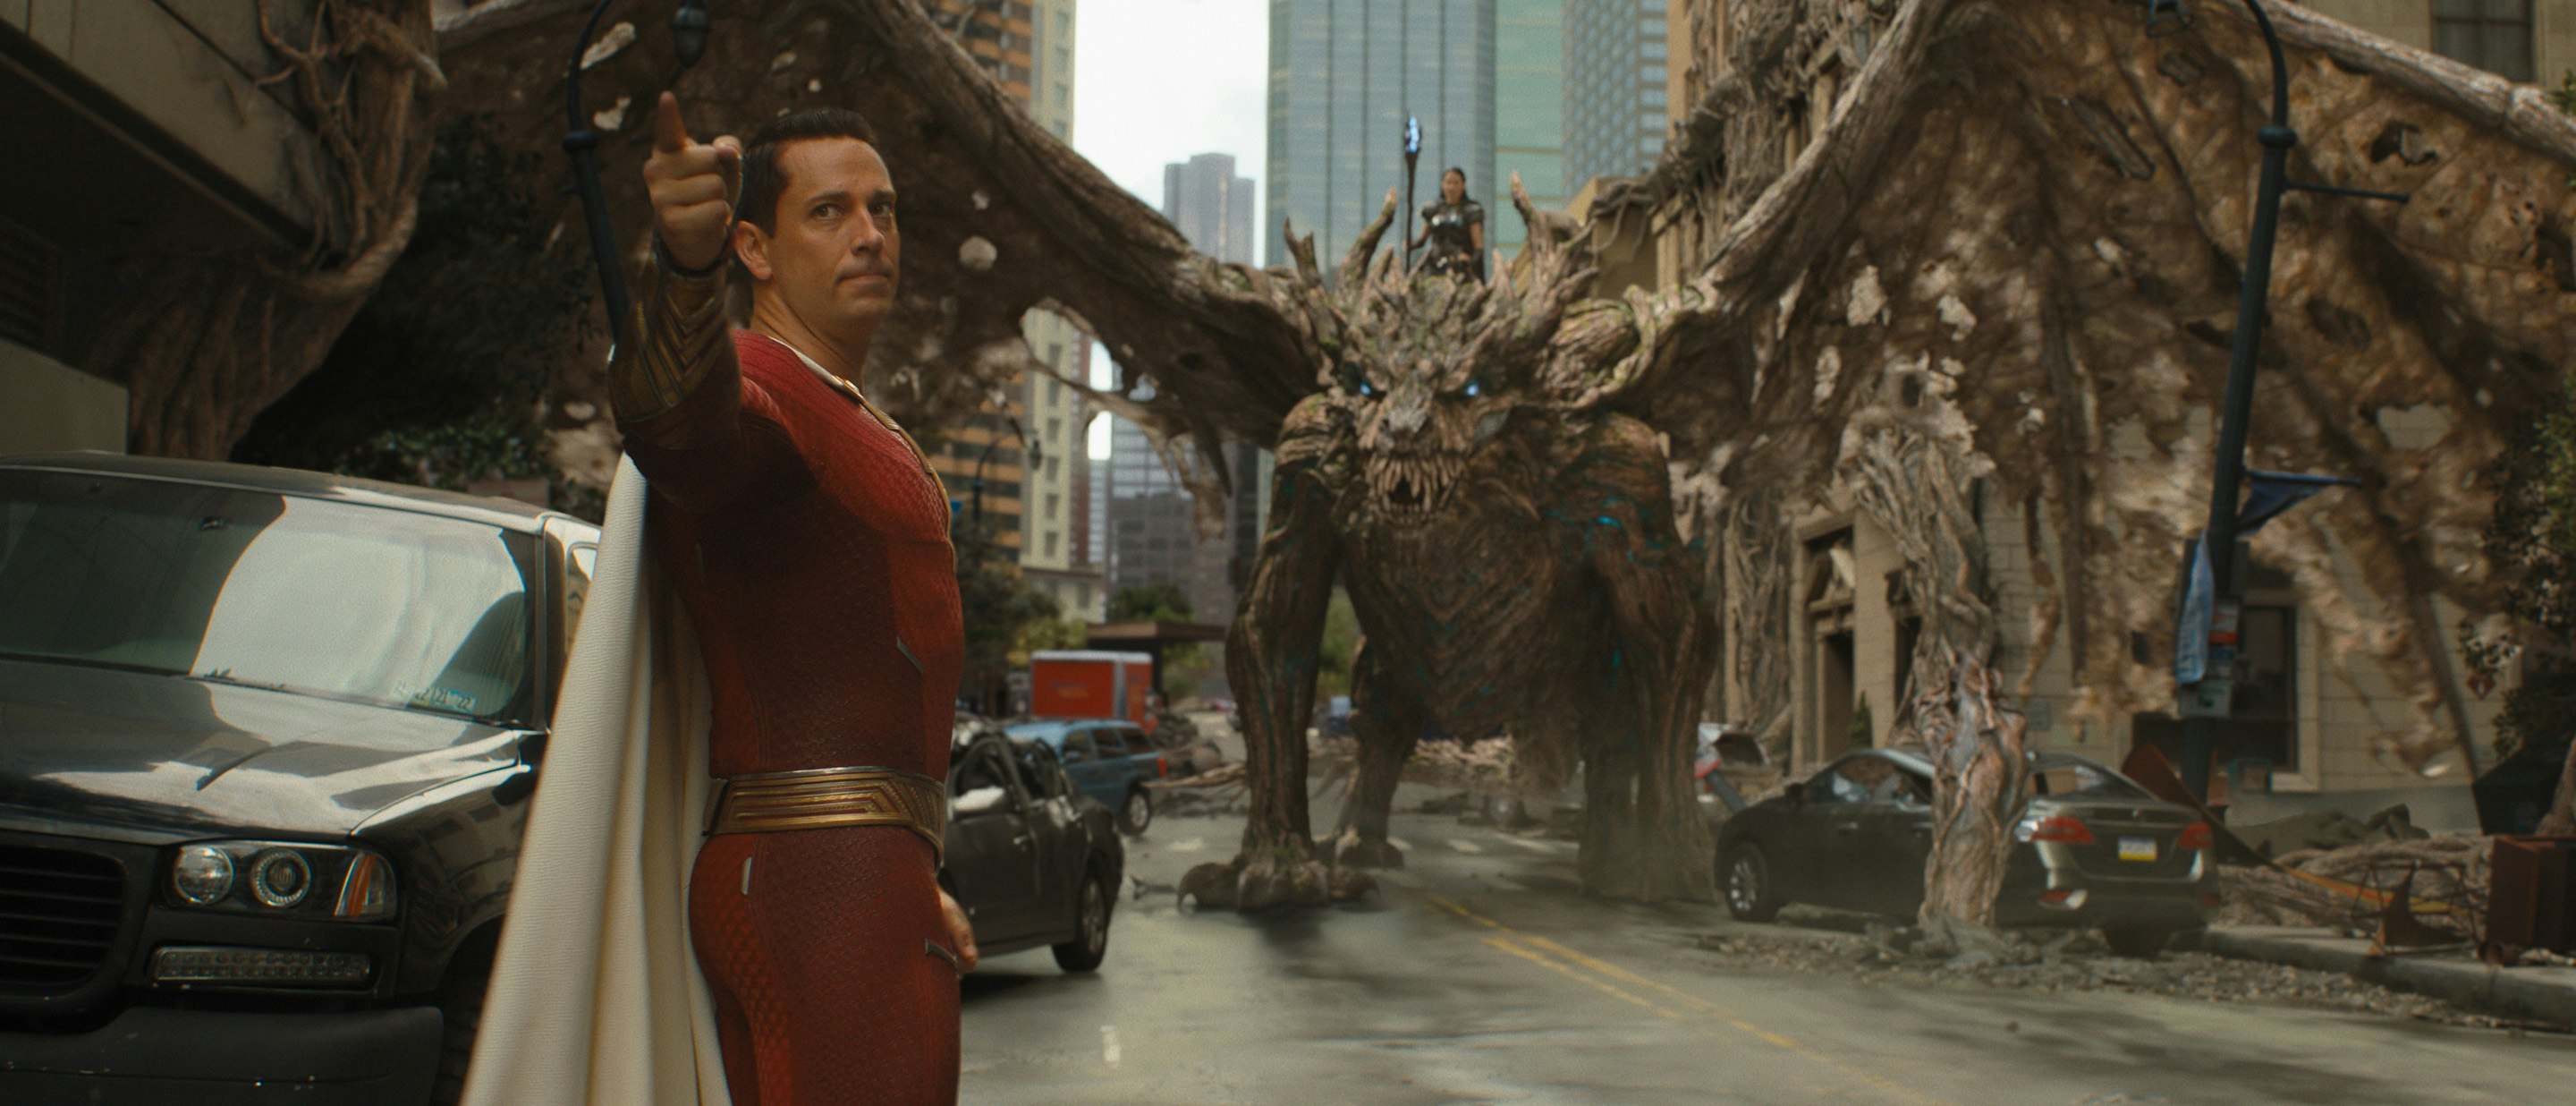 Shazam points finger mid-fight with dragon behind him. See Shazam with on-screen captions on Saturday March 18 and Wednesday March 22 at 4PM at select Harkins locations.